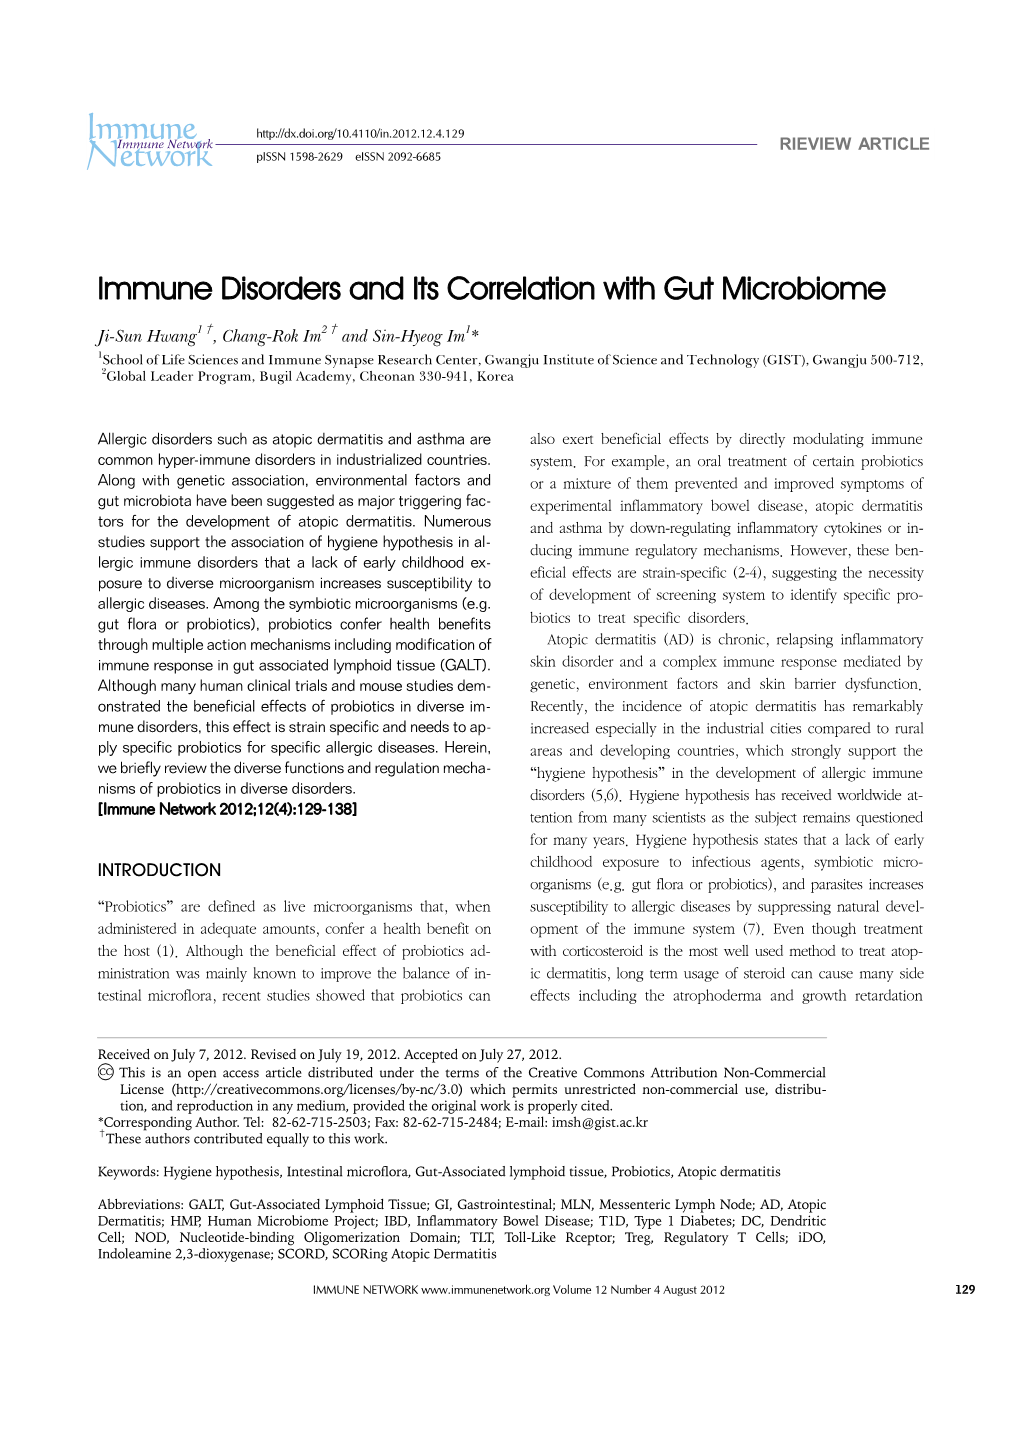 Immune Disorders and Its Correlation with Gut Microbiome